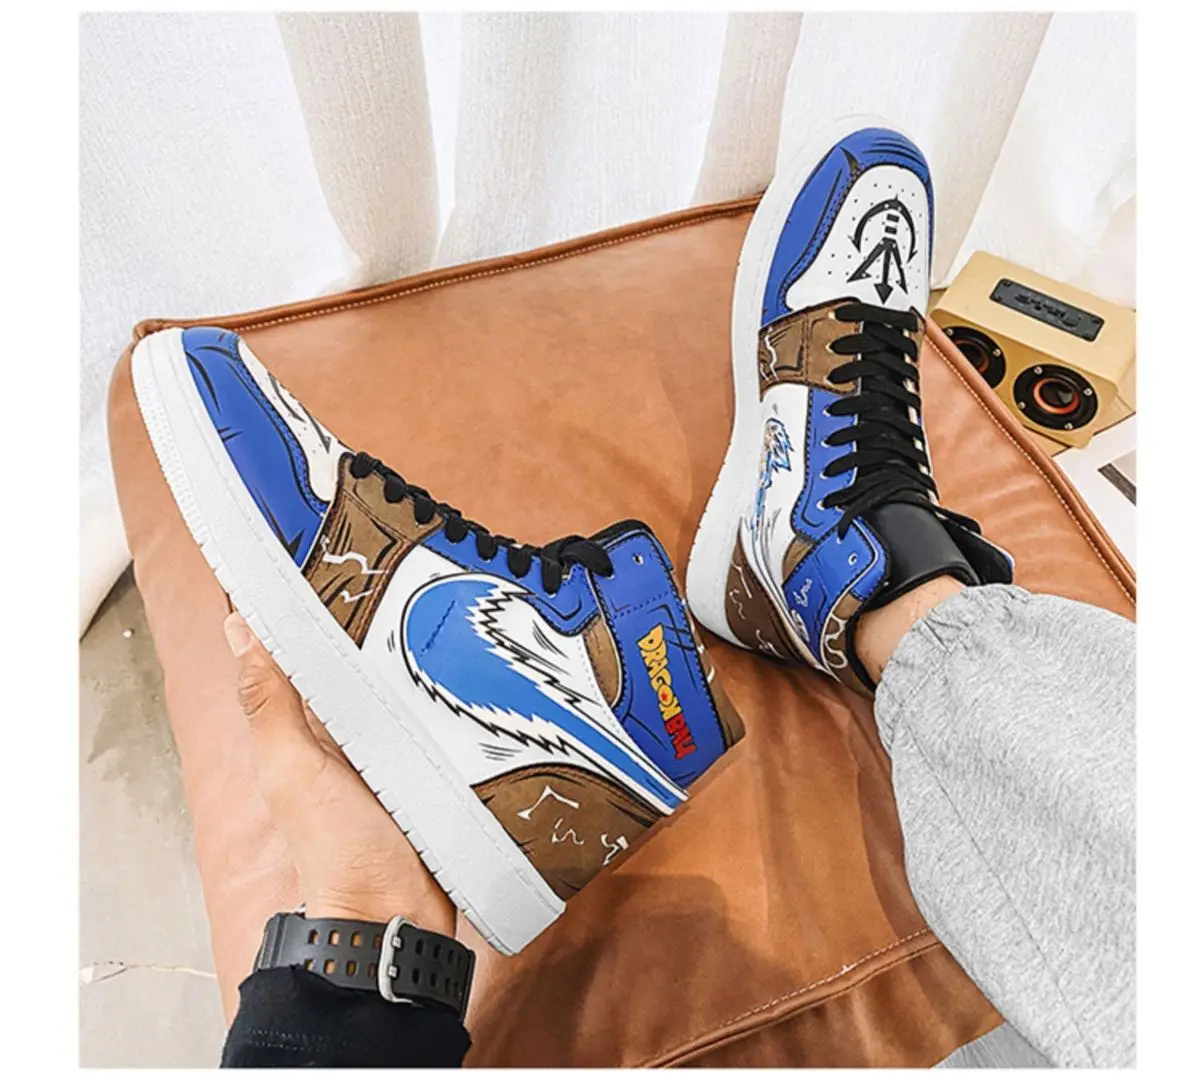 New Anime Dragon Ball Goku Naruto One Piece Men's Sneakers Fashion Boy Basketball Shoes Outdoor Casual Sports Running Breathable